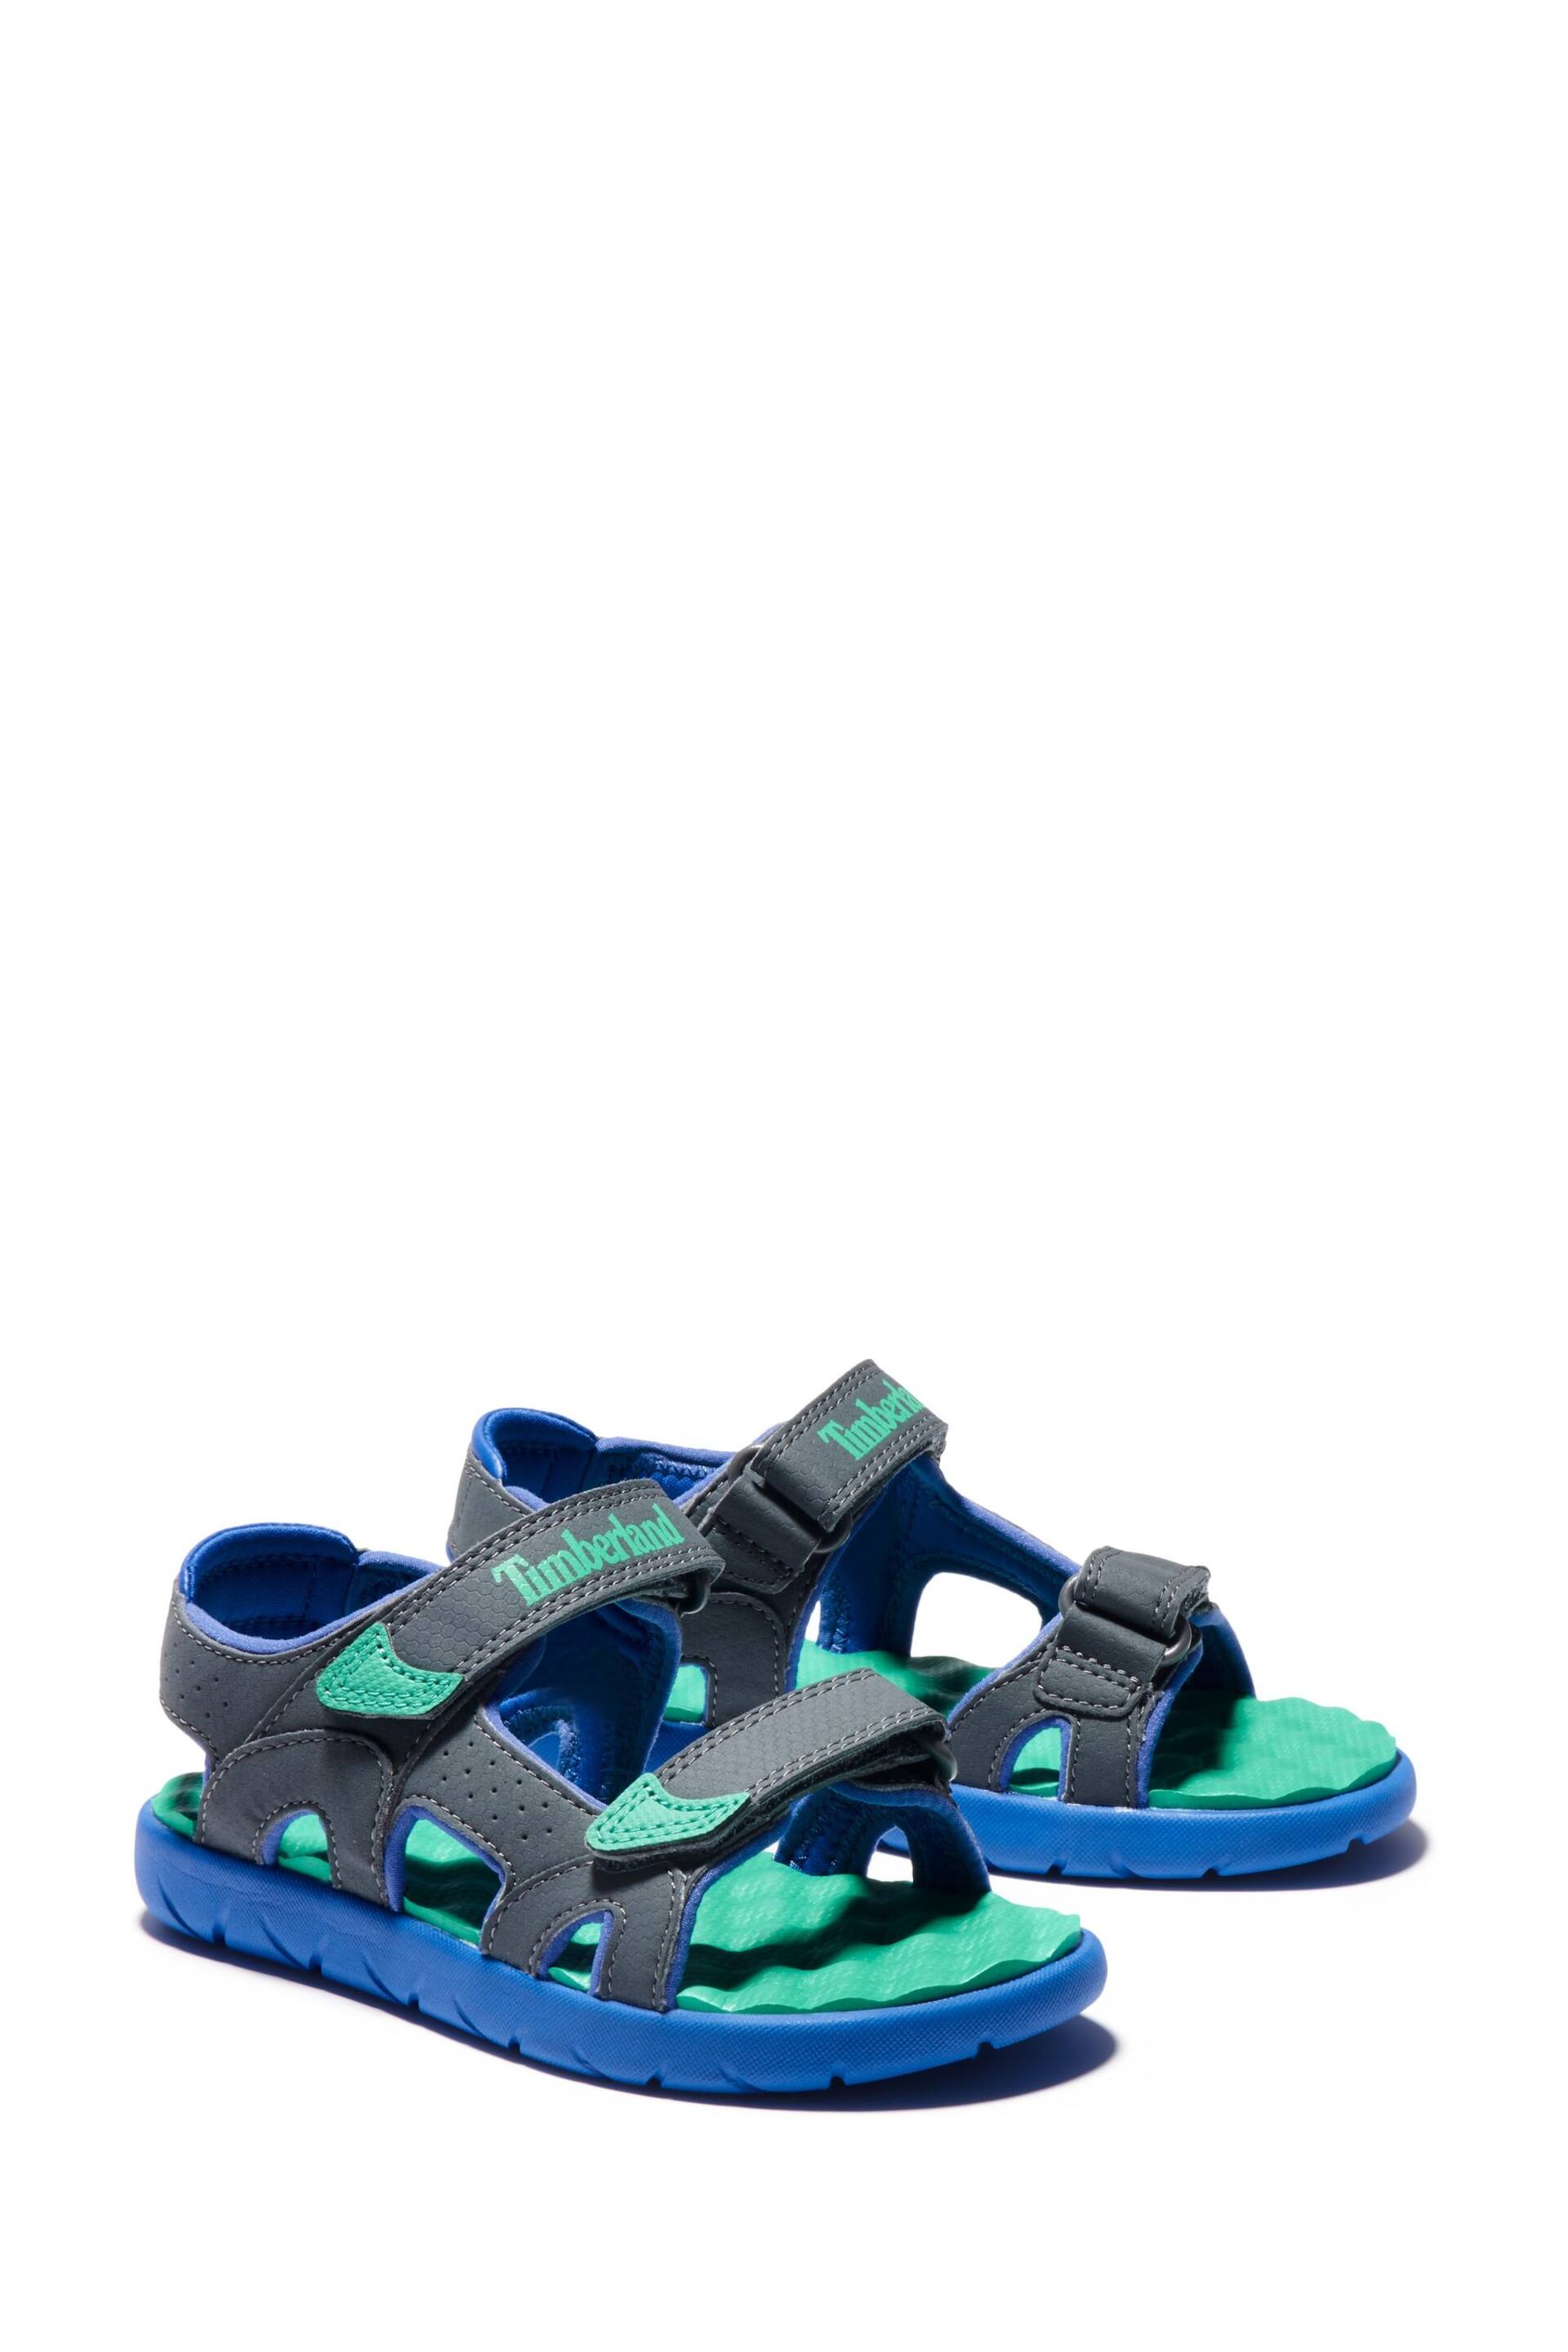 Timberland Perkins Row Blue Sandals - Image 2 of 4